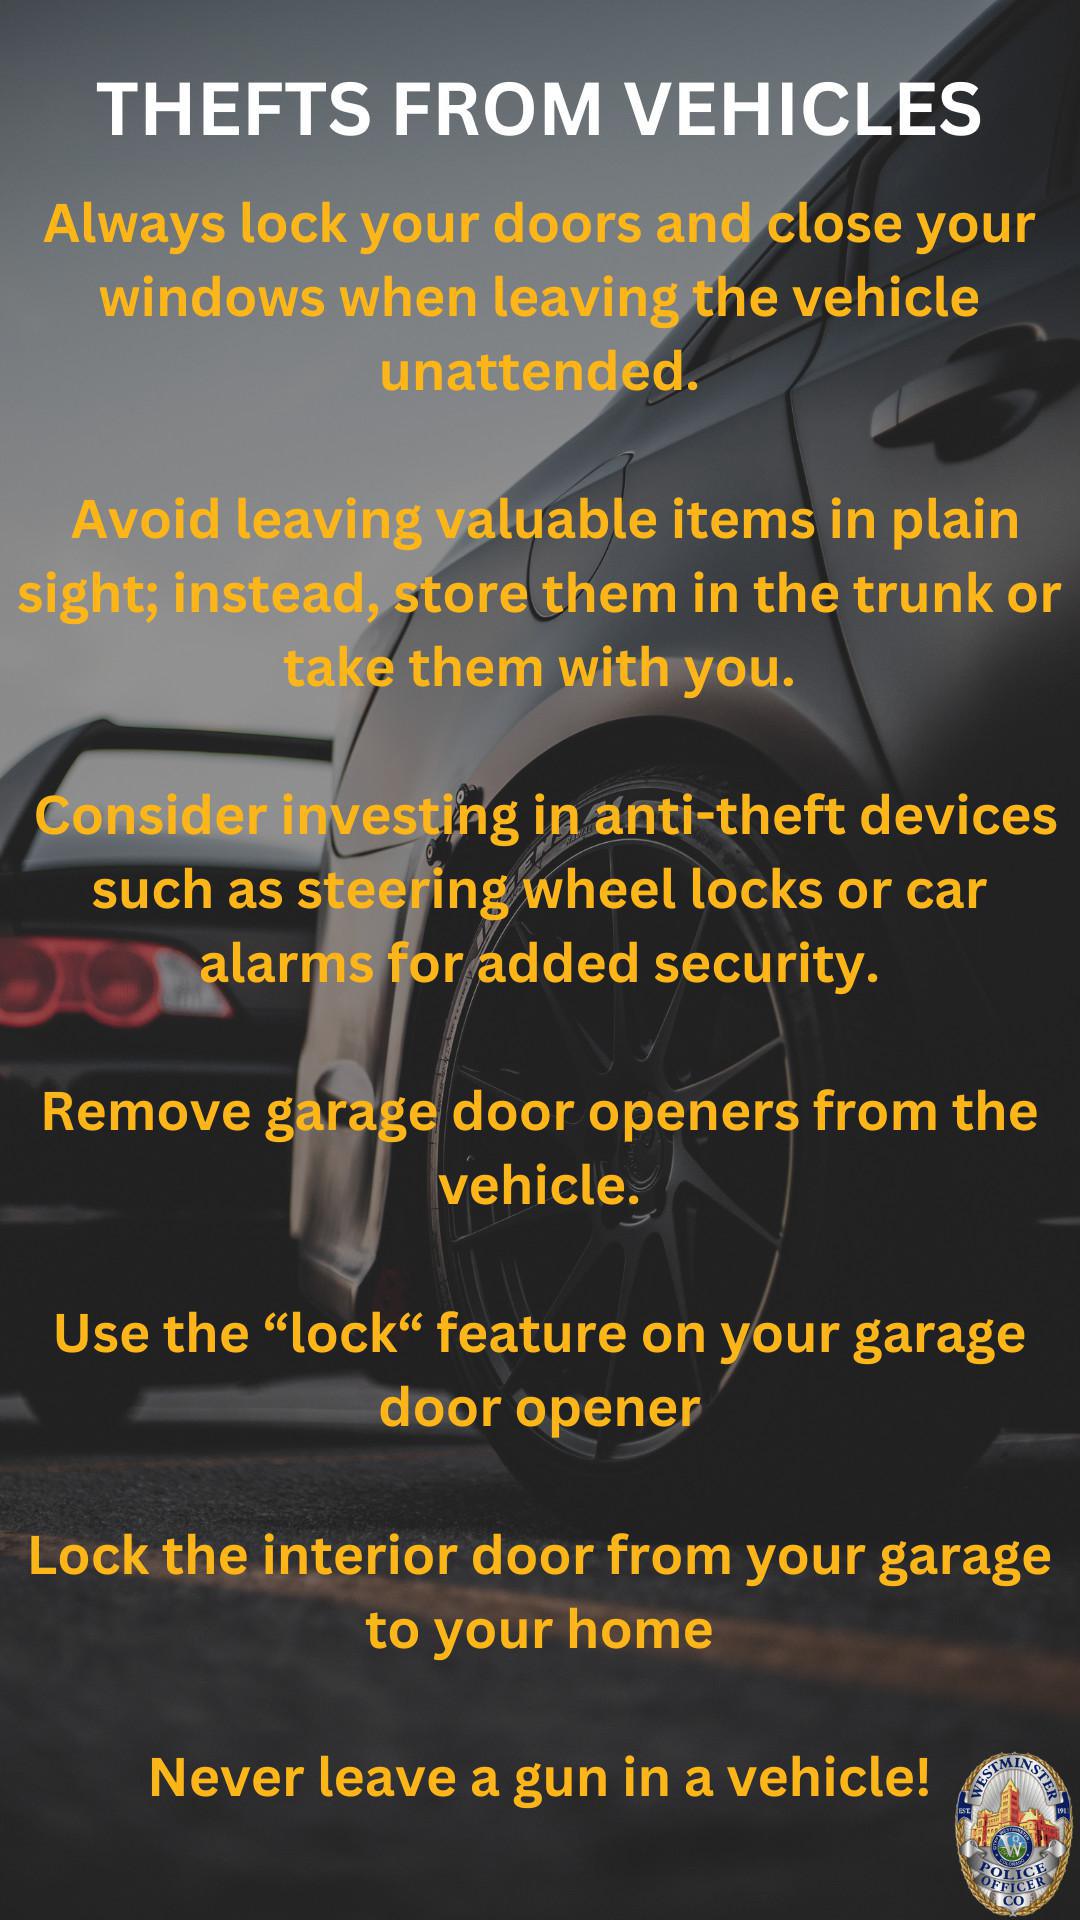 Preventing thefts from vehicles